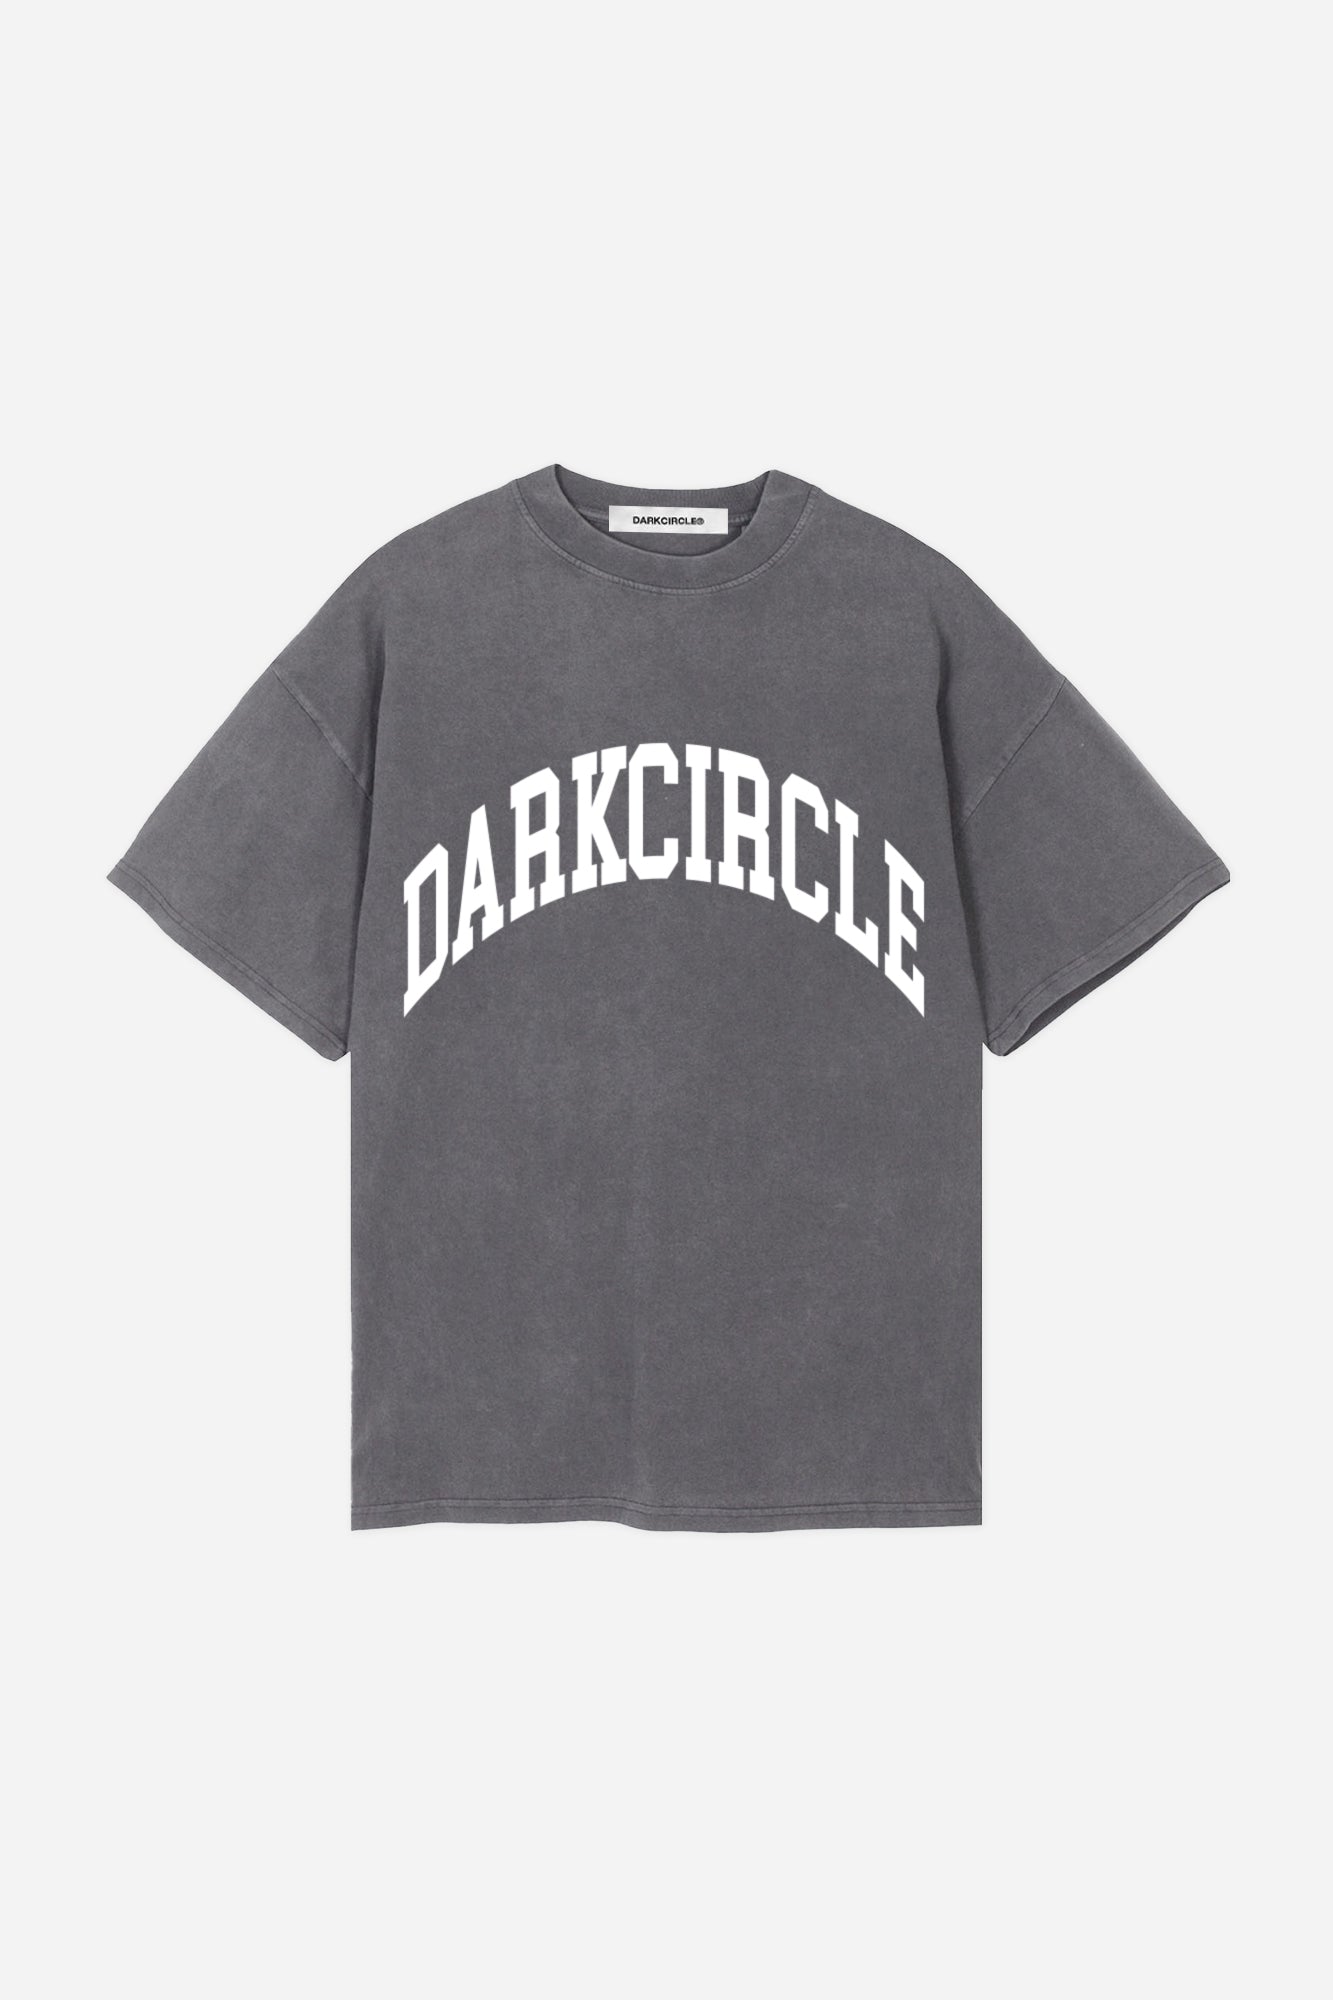 Collegiate T-Shirt - Vintage Washed Charcoal